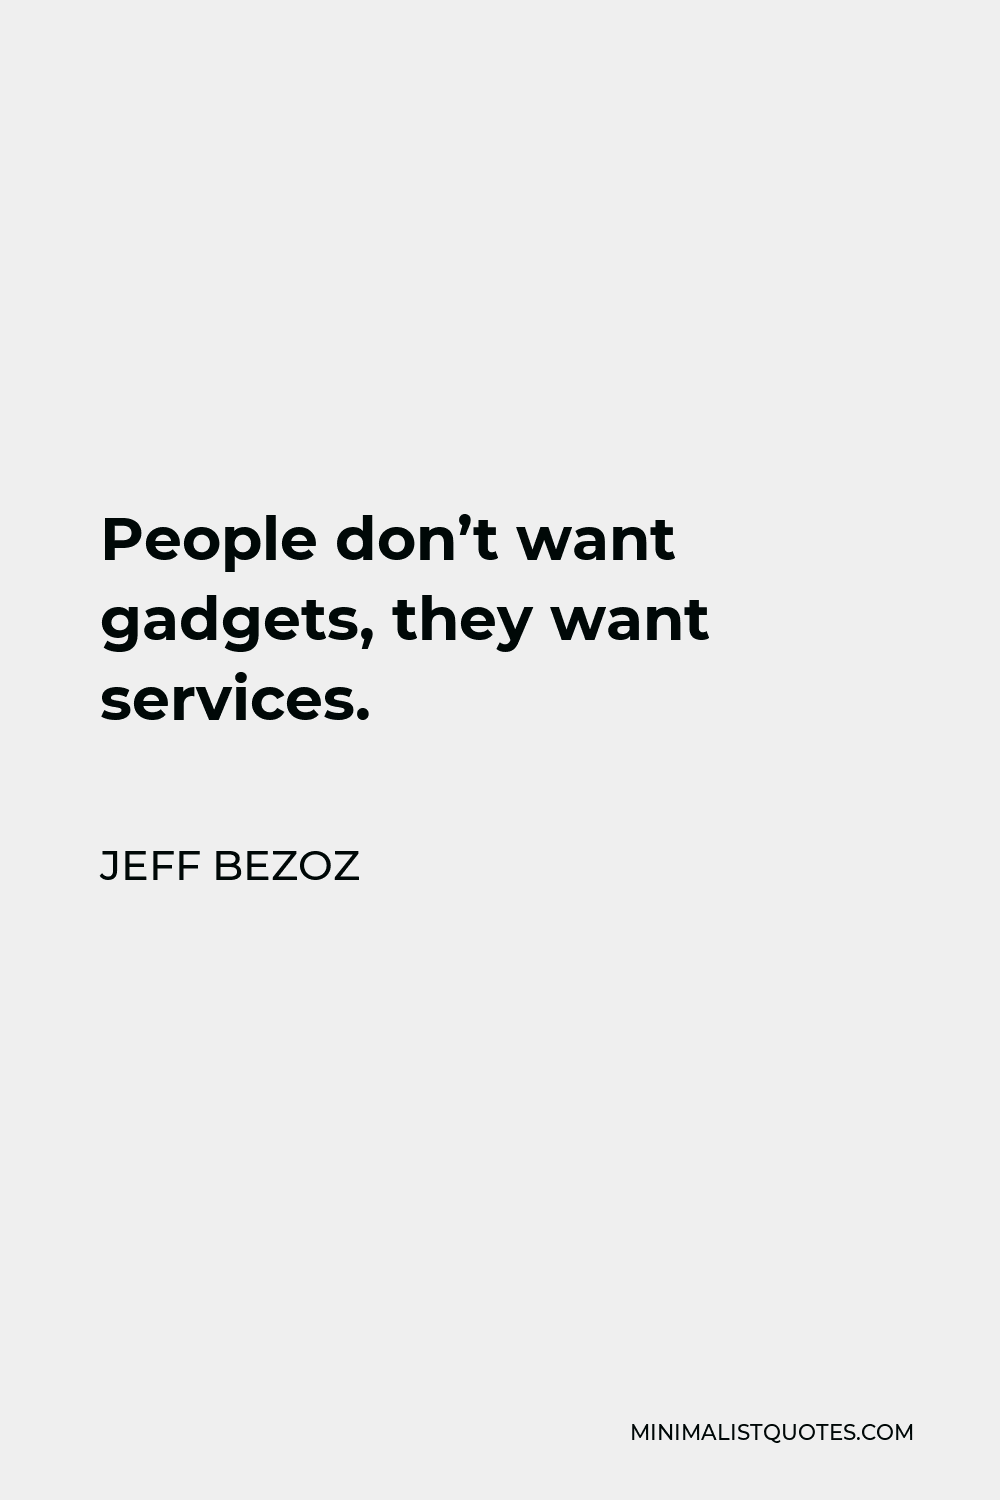 Jeff Bezoz Quote - People don’t want gadgets, they want services.